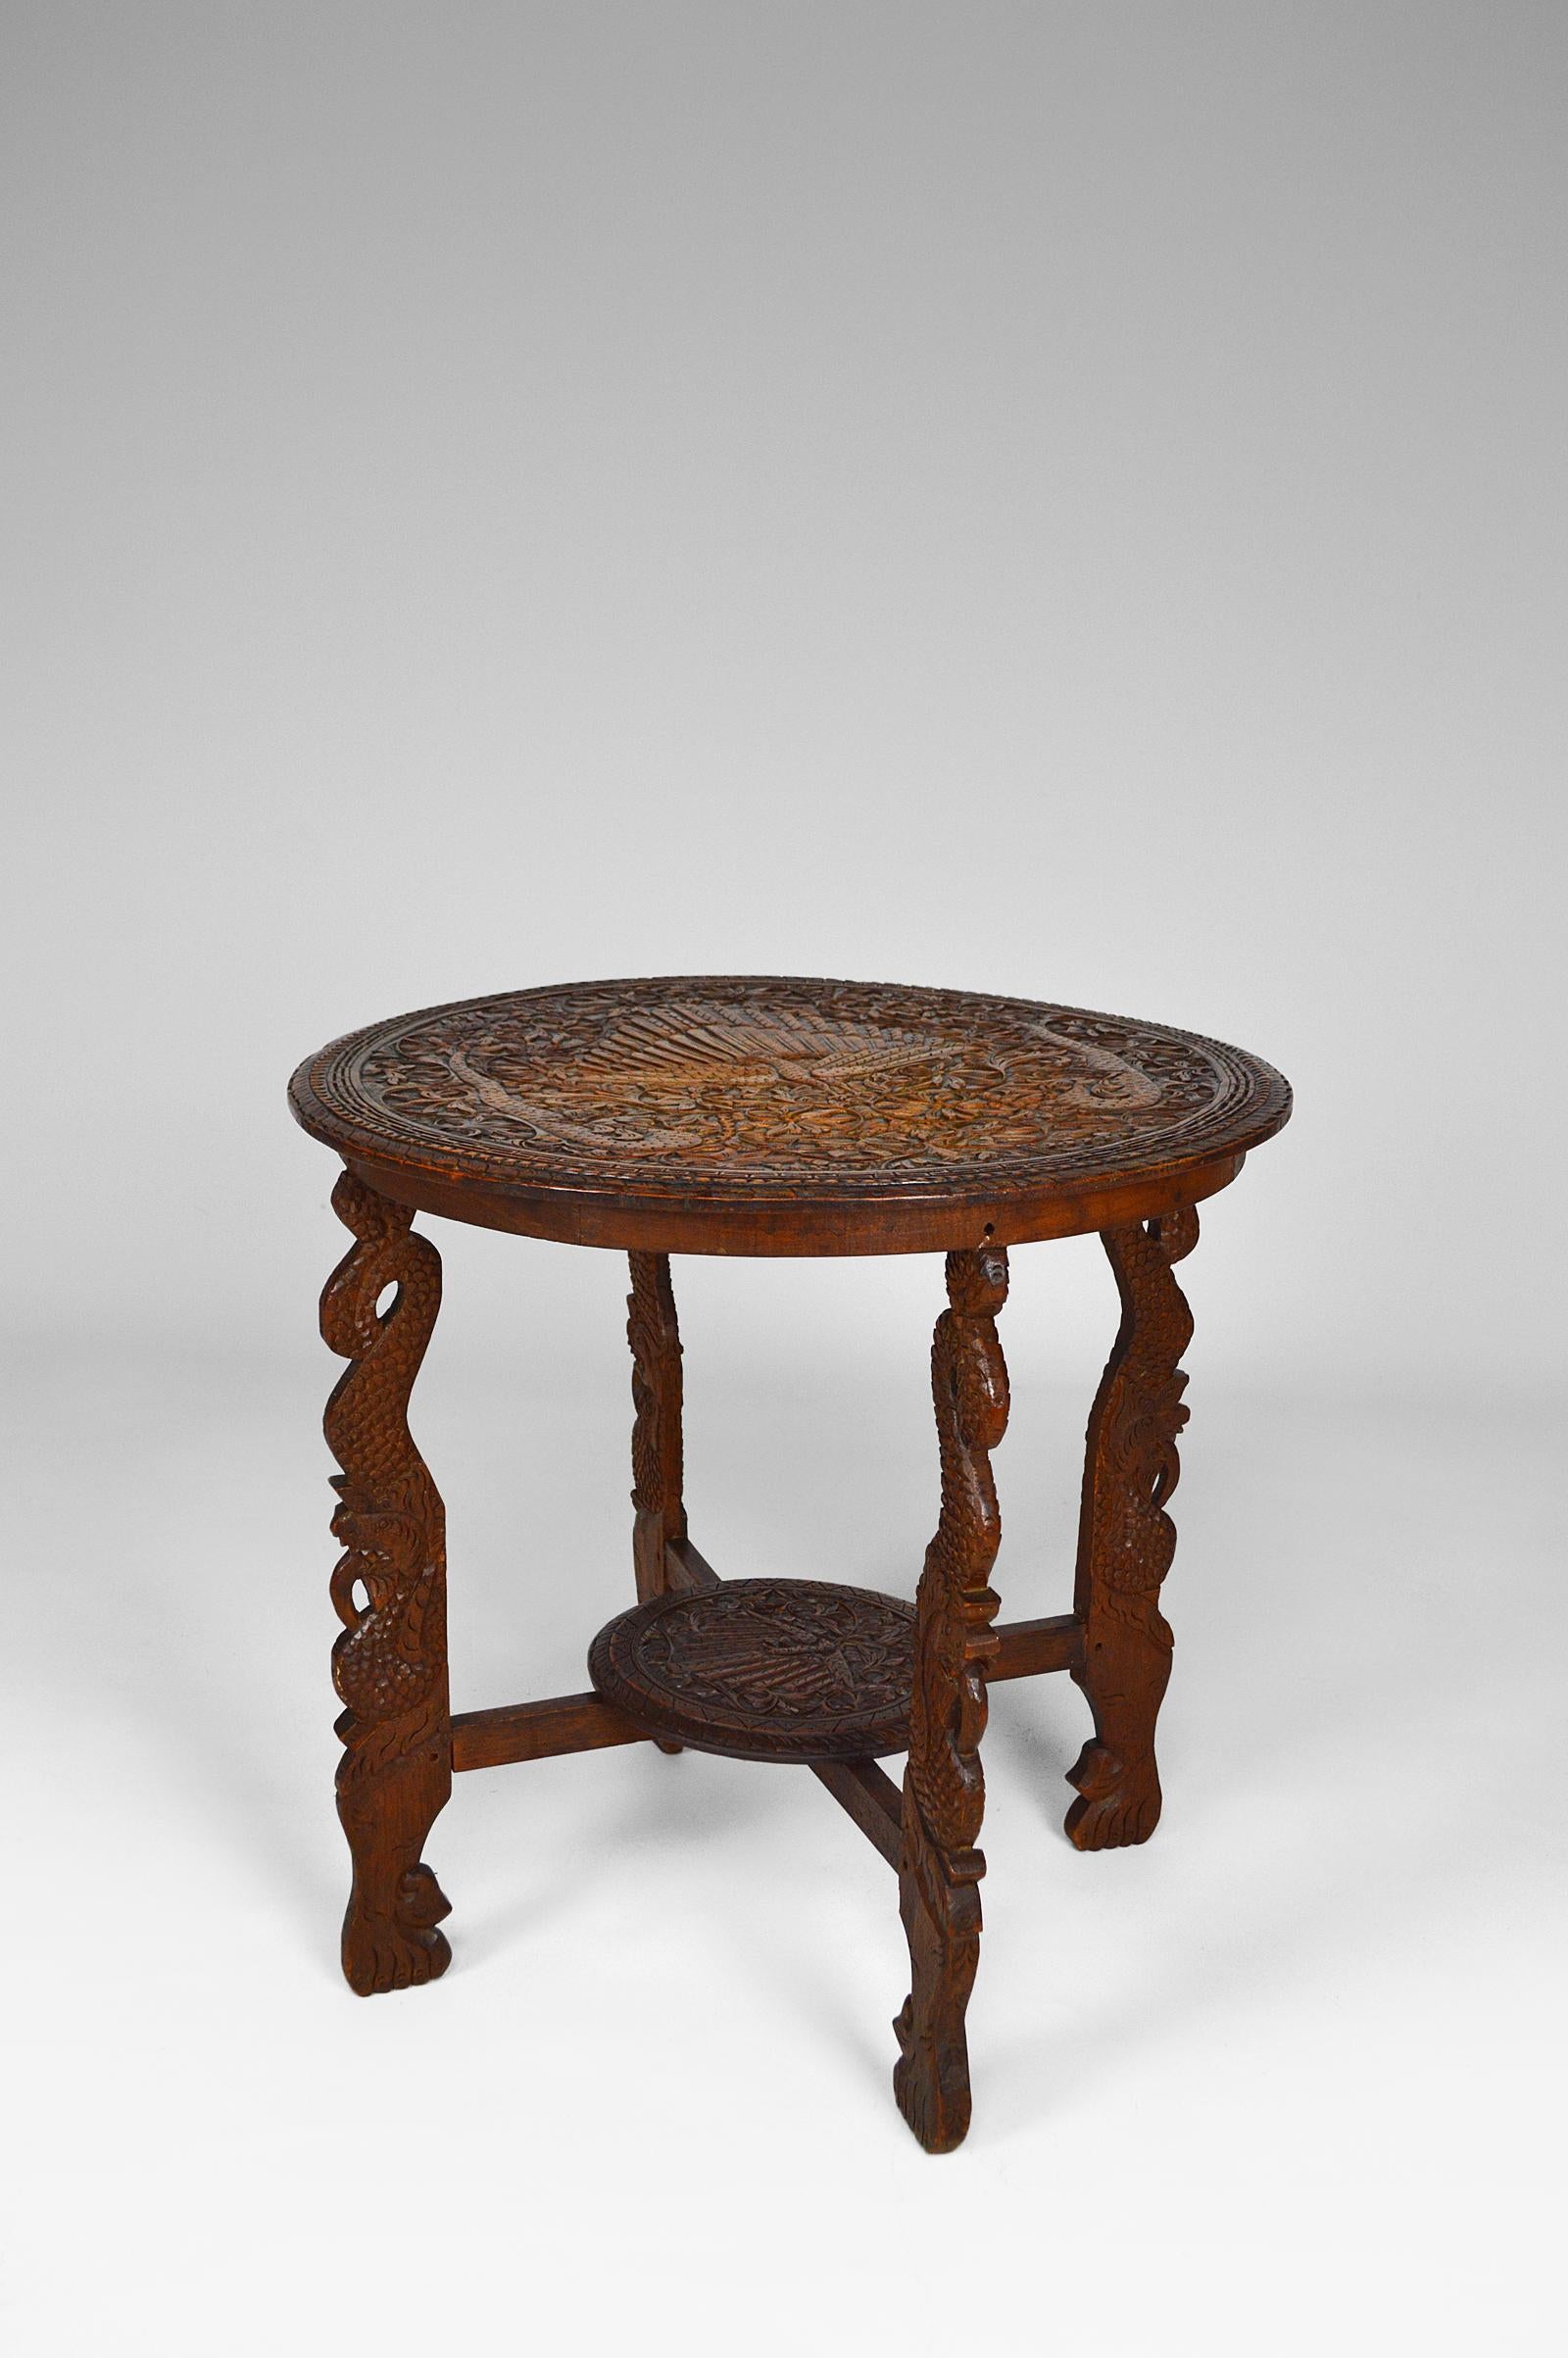 Superb Asian side table / tea or coffee table in carved solid wood.

The carved top represents a majestic peacock surrounded by two serpents or mythological dragons, resting around lush vegetation.
The feet are also carved in the shape of